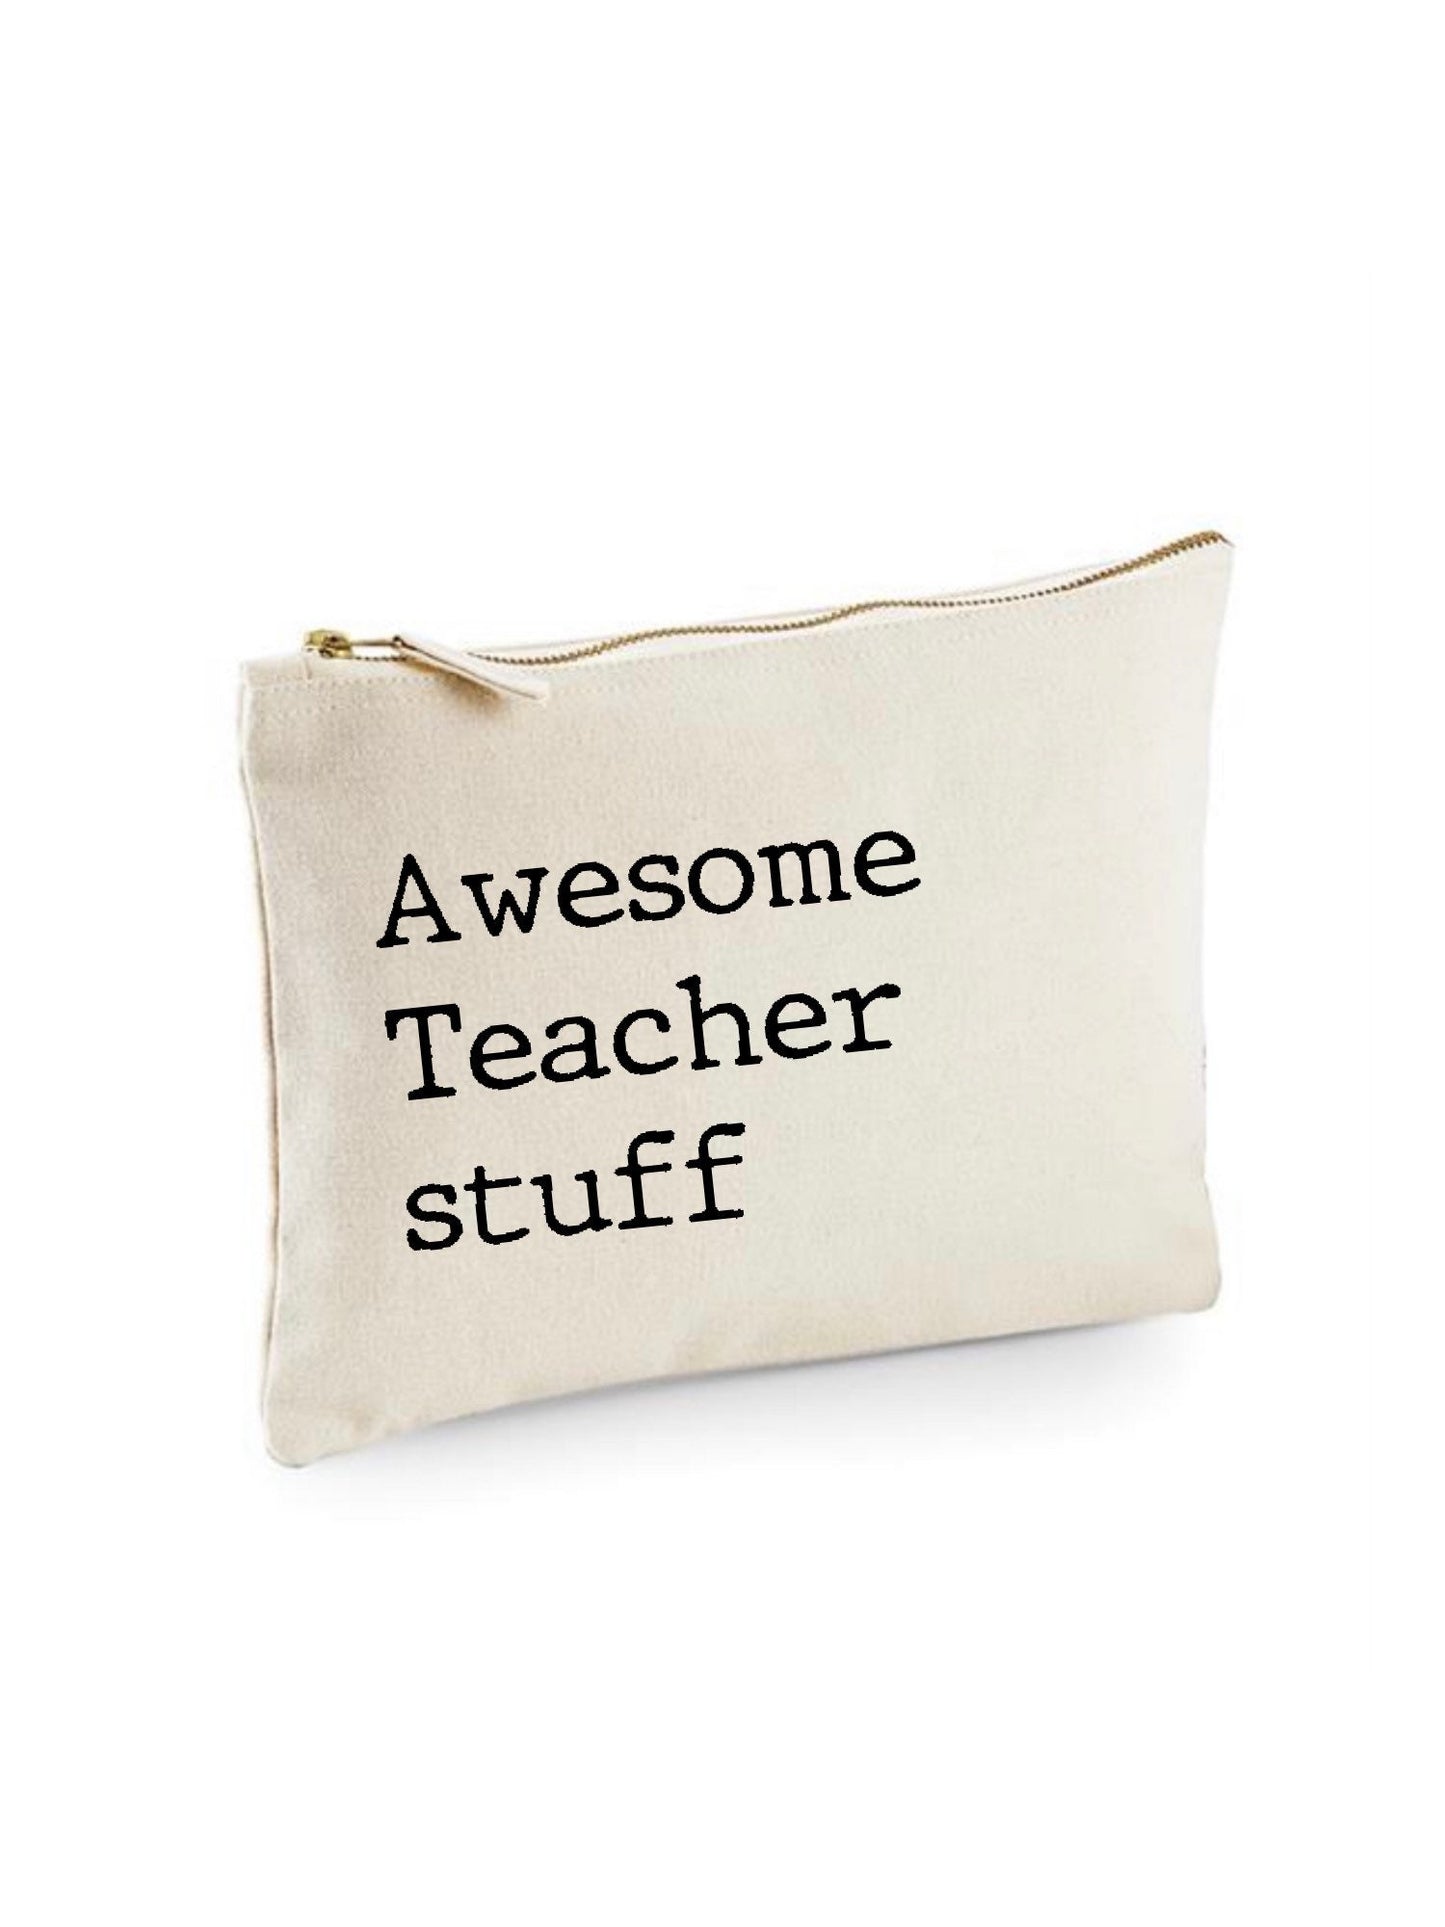 Teacher gift, awesome teacher stuff pouch, pencil and stationery case for end of school teacher presents